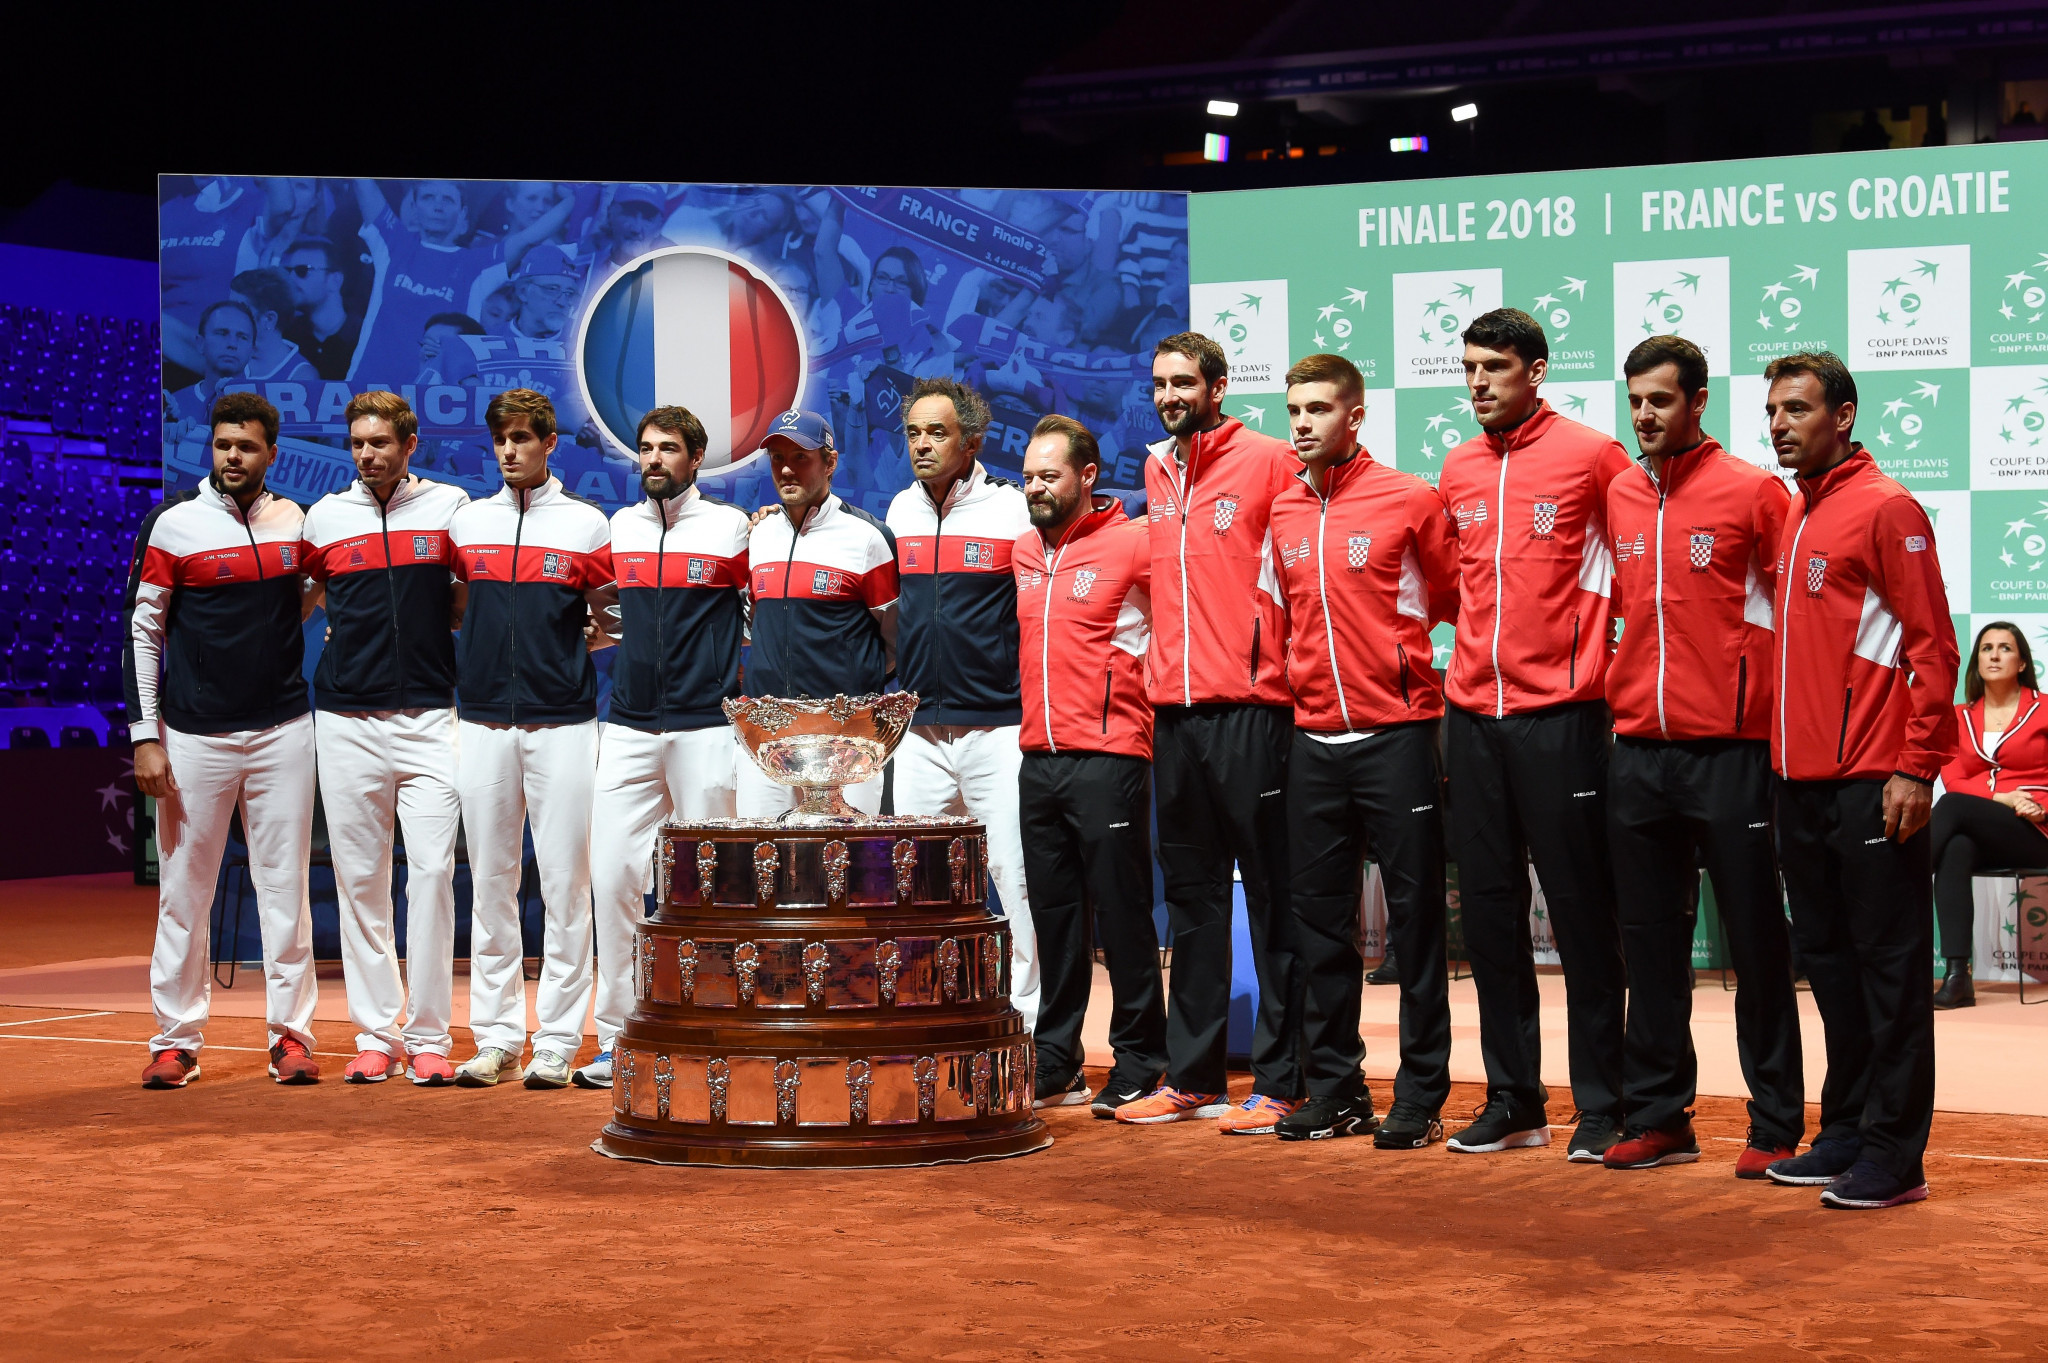 France and Croatia will battle it out in an historic Davis Cup final in Lille ©Getty Images